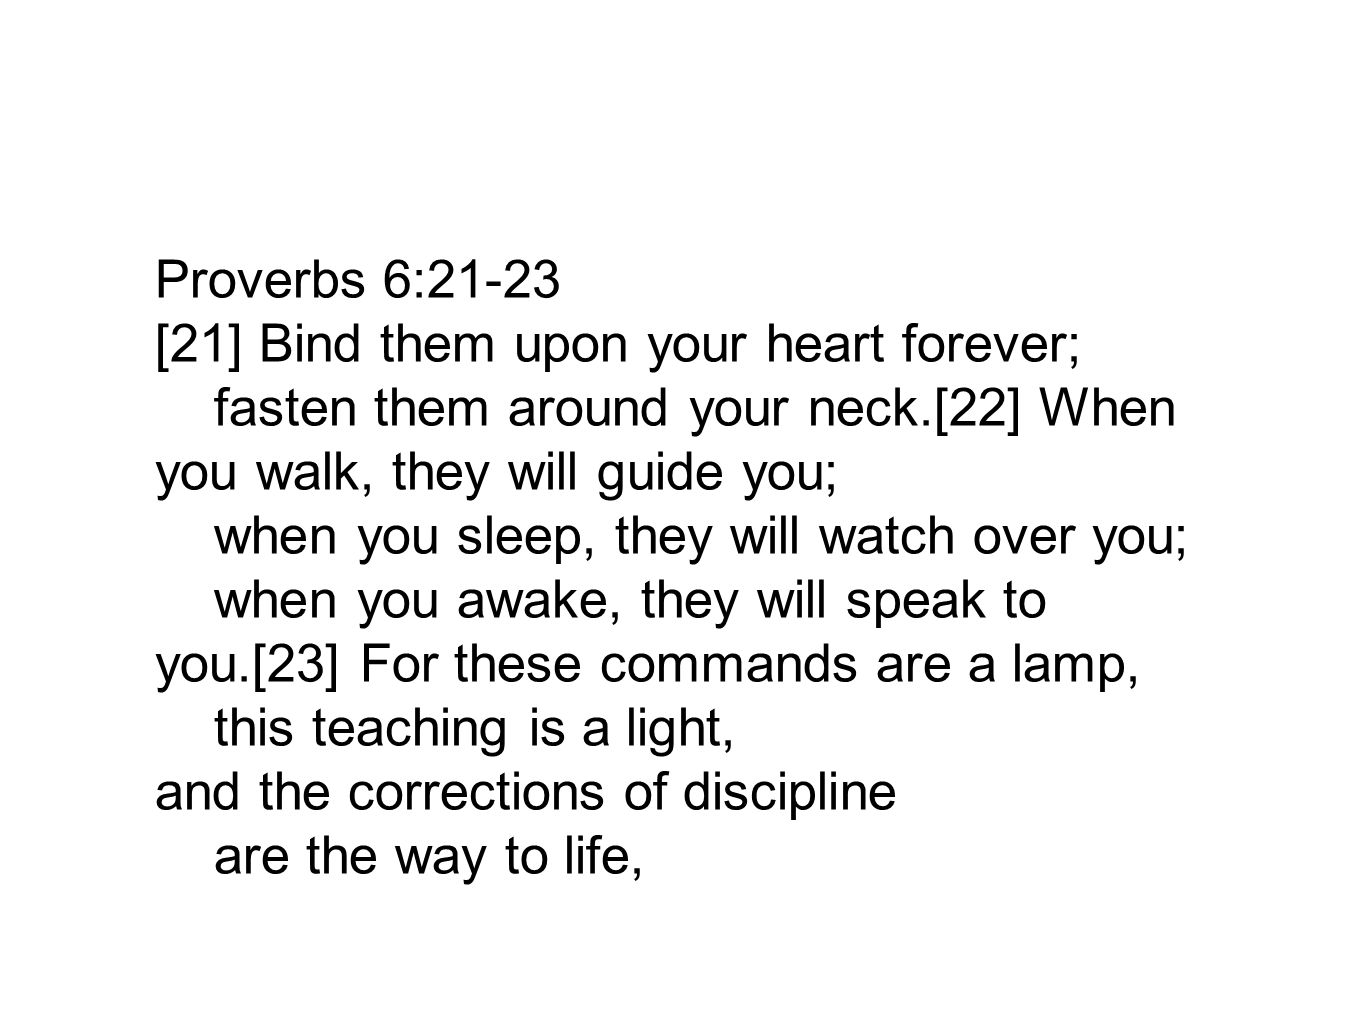 Proverbs 6:21-23 [21] Bind them upon your heart forever; fasten them around your neck.[22] When you walk, they will guide you; when you sleep, they will watch over you; when you awake, they will speak to you.[23] For these commands are a lamp, this teaching is a light, and the corrections of discipline are the way to life,